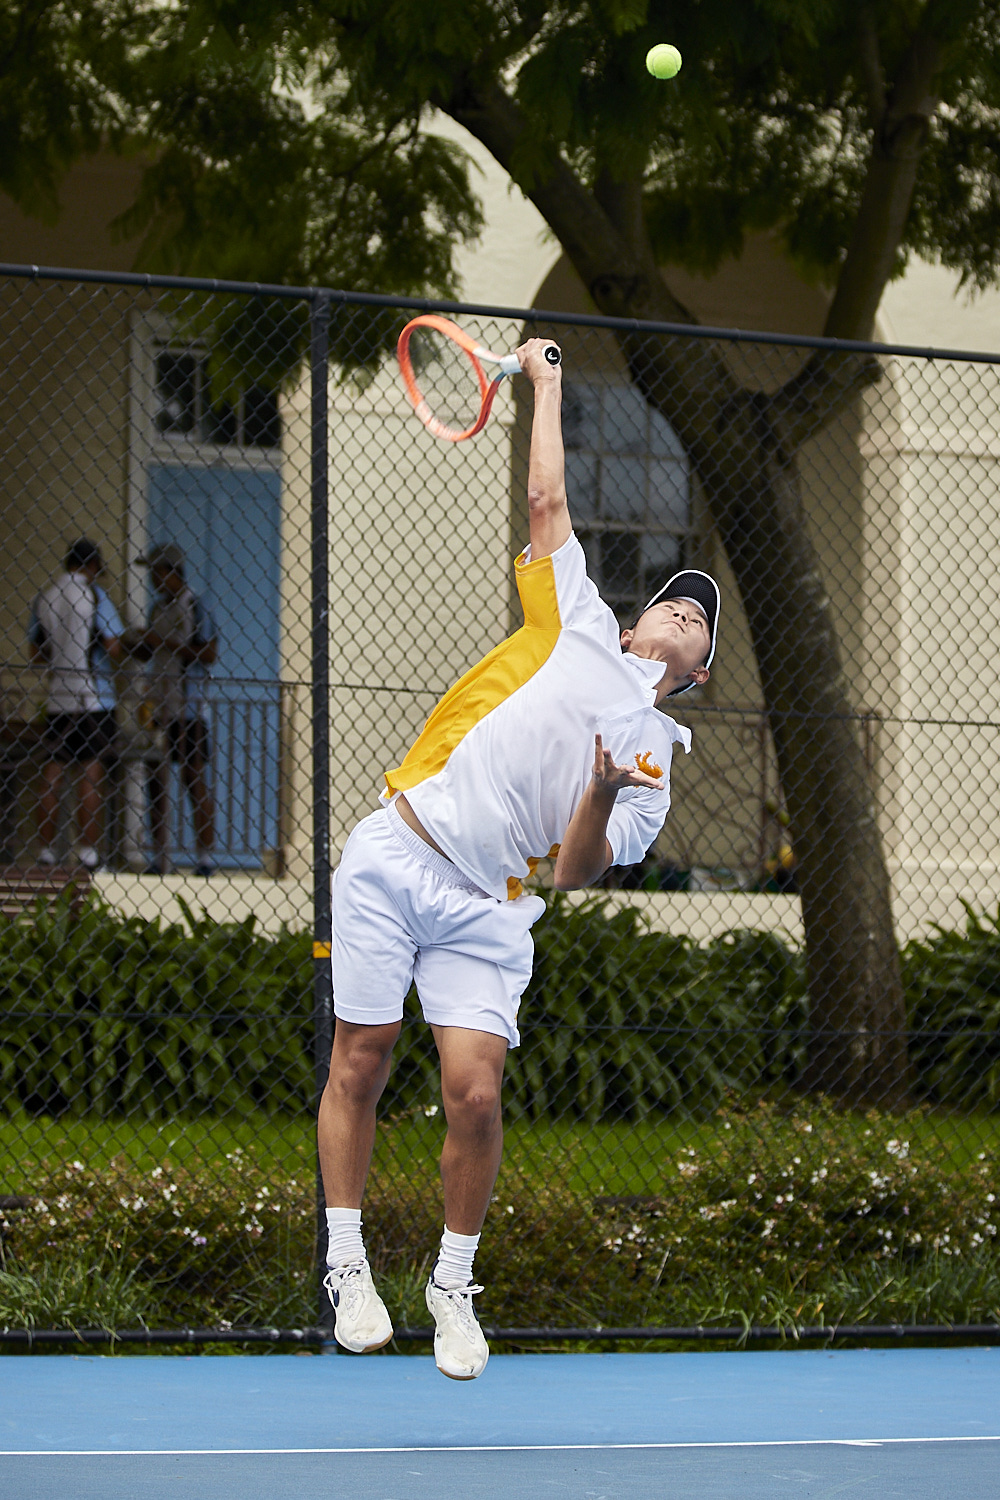 Jeremy is a Rising Tennis Star - The Scots College